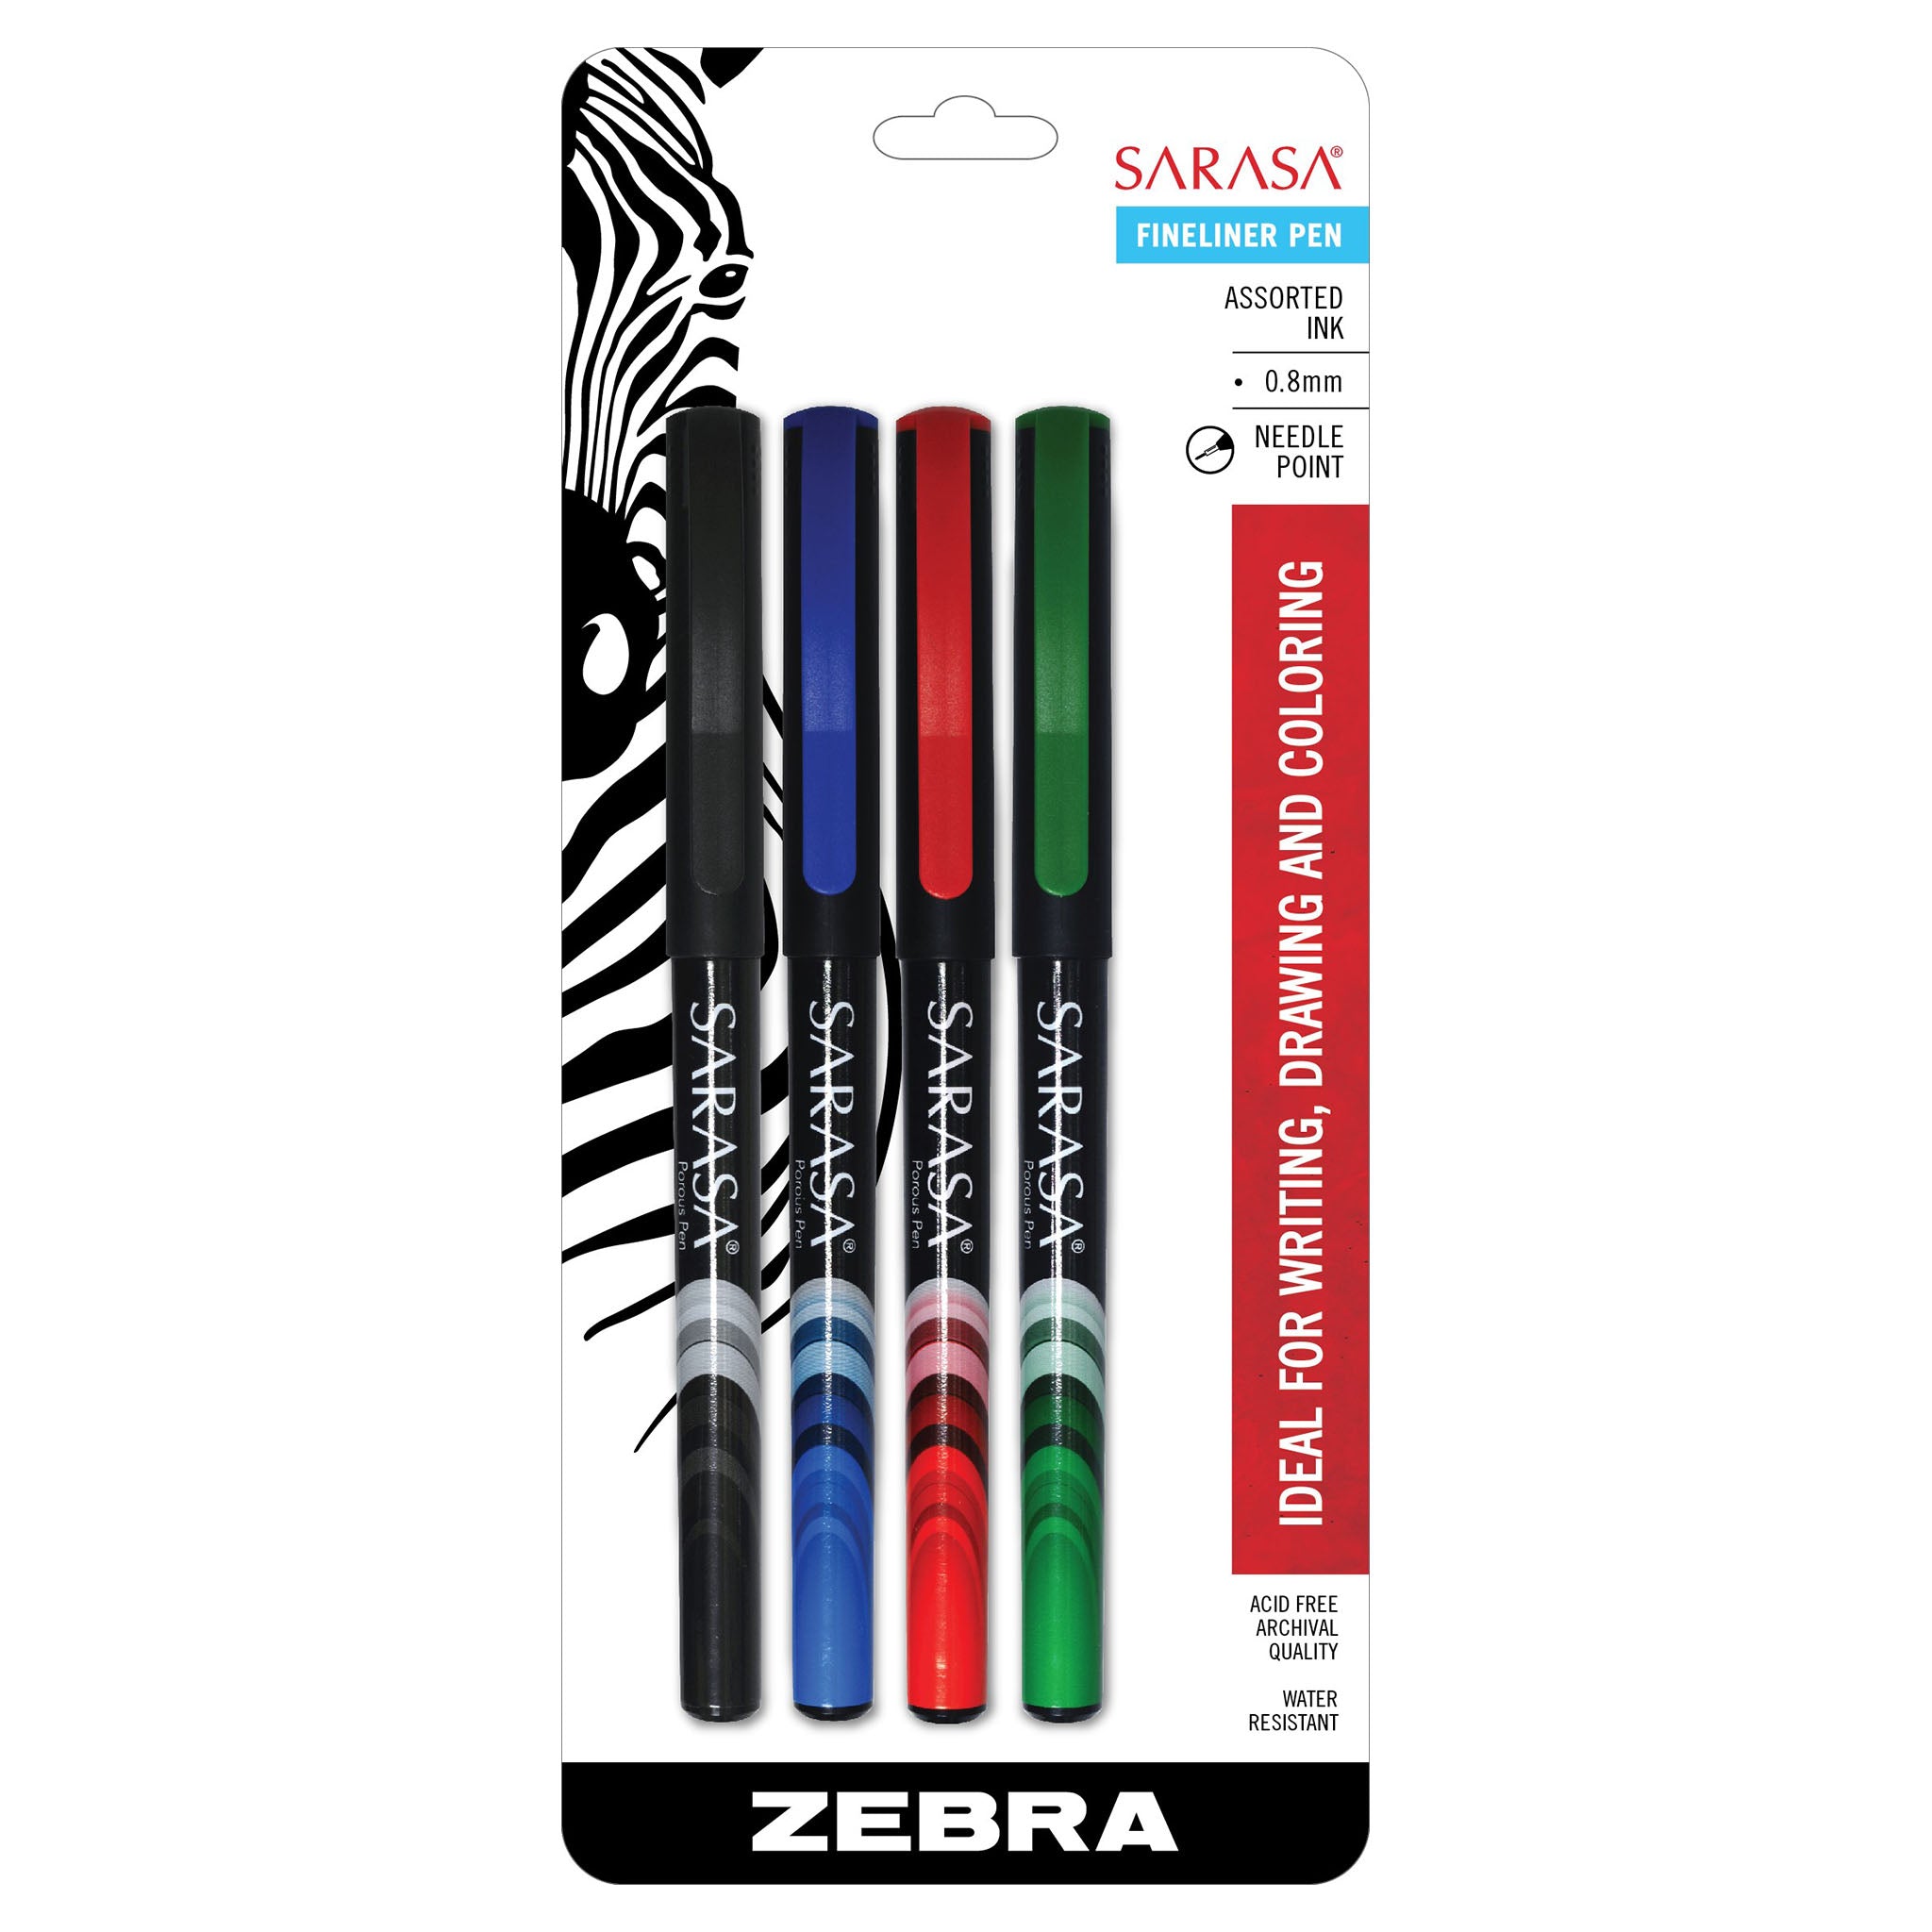 Fabric Markers, write on any reinforcement, in stock